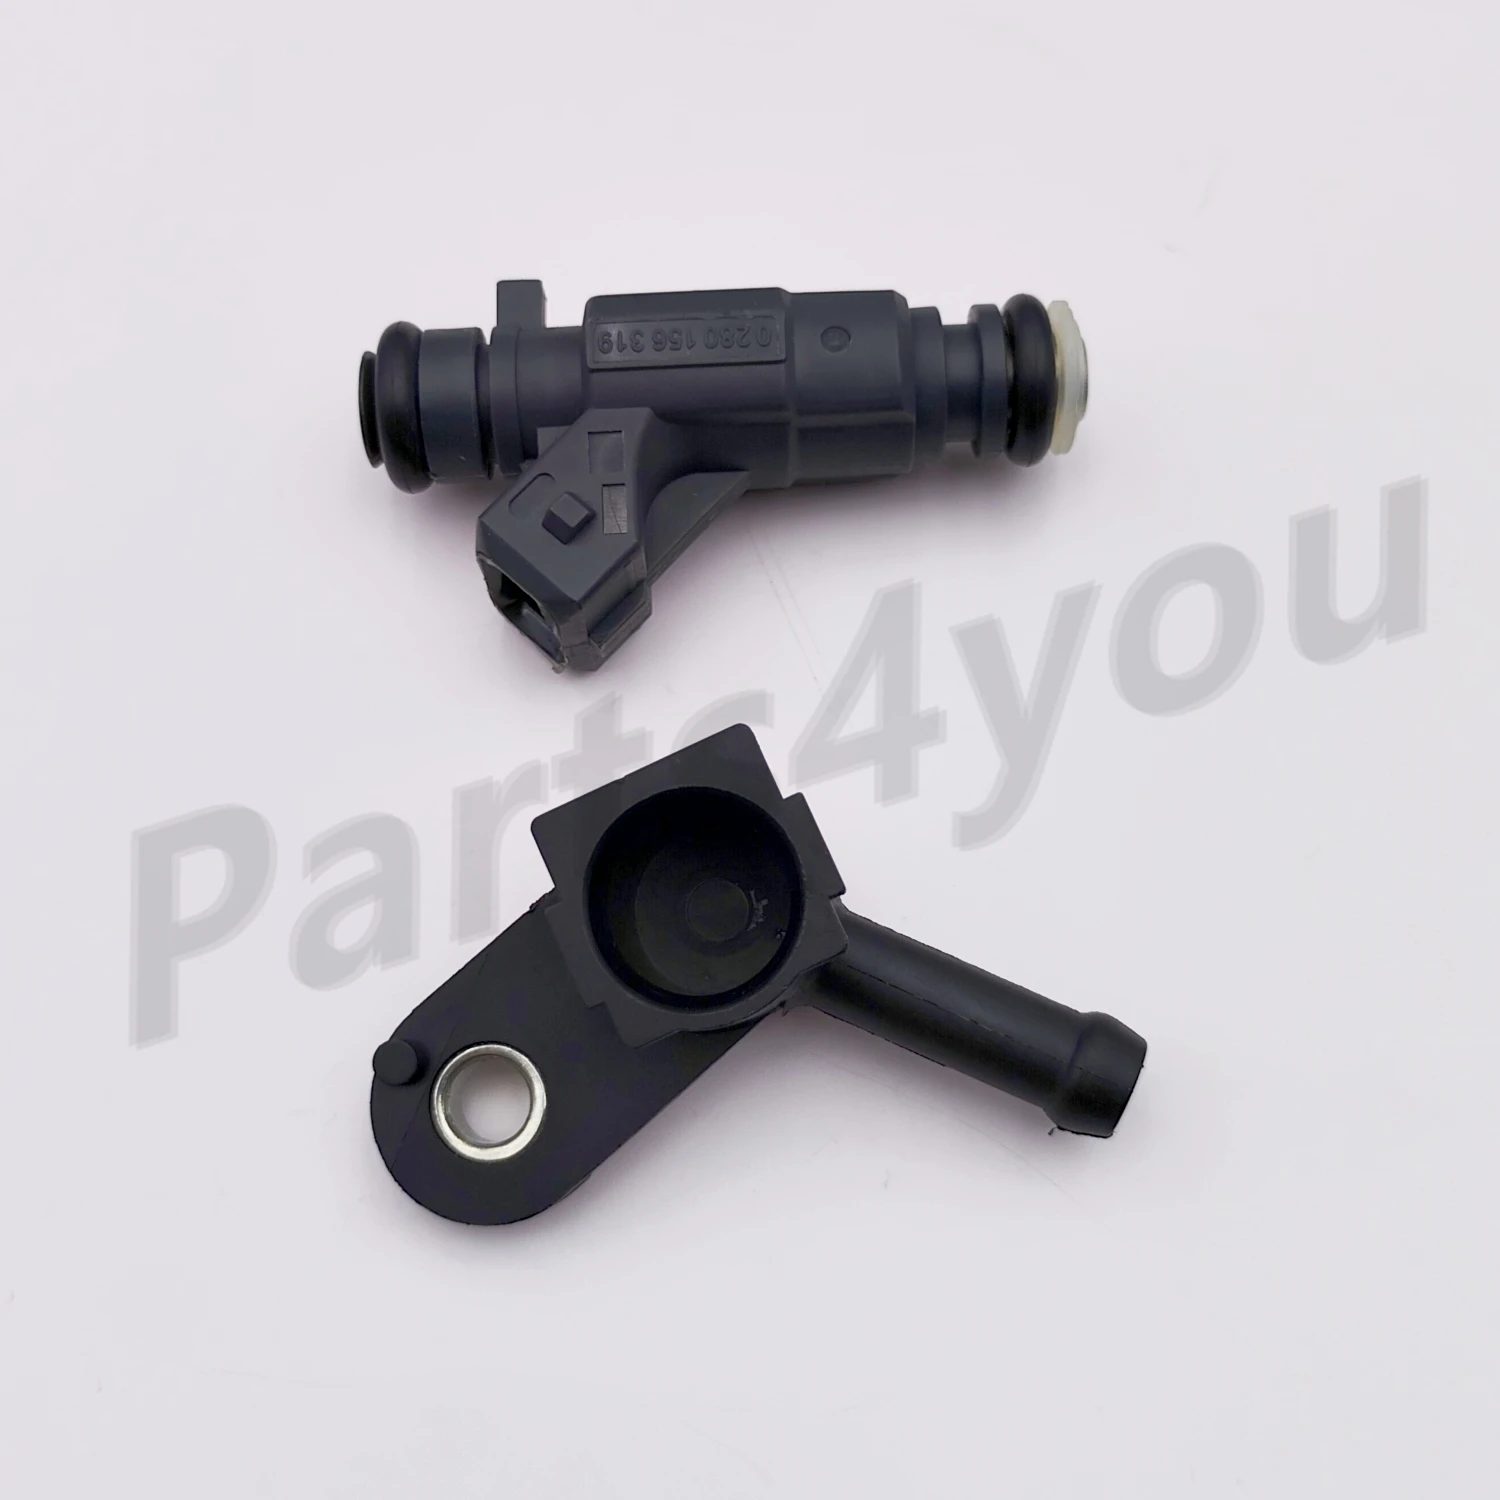 Injector with Injector Cap Kit for CFmoto 500 X5 CF188 600 X6 U6 Z6 625 CF196 X-Lander Rancher Goes 625i 018B-171000 018B-170002